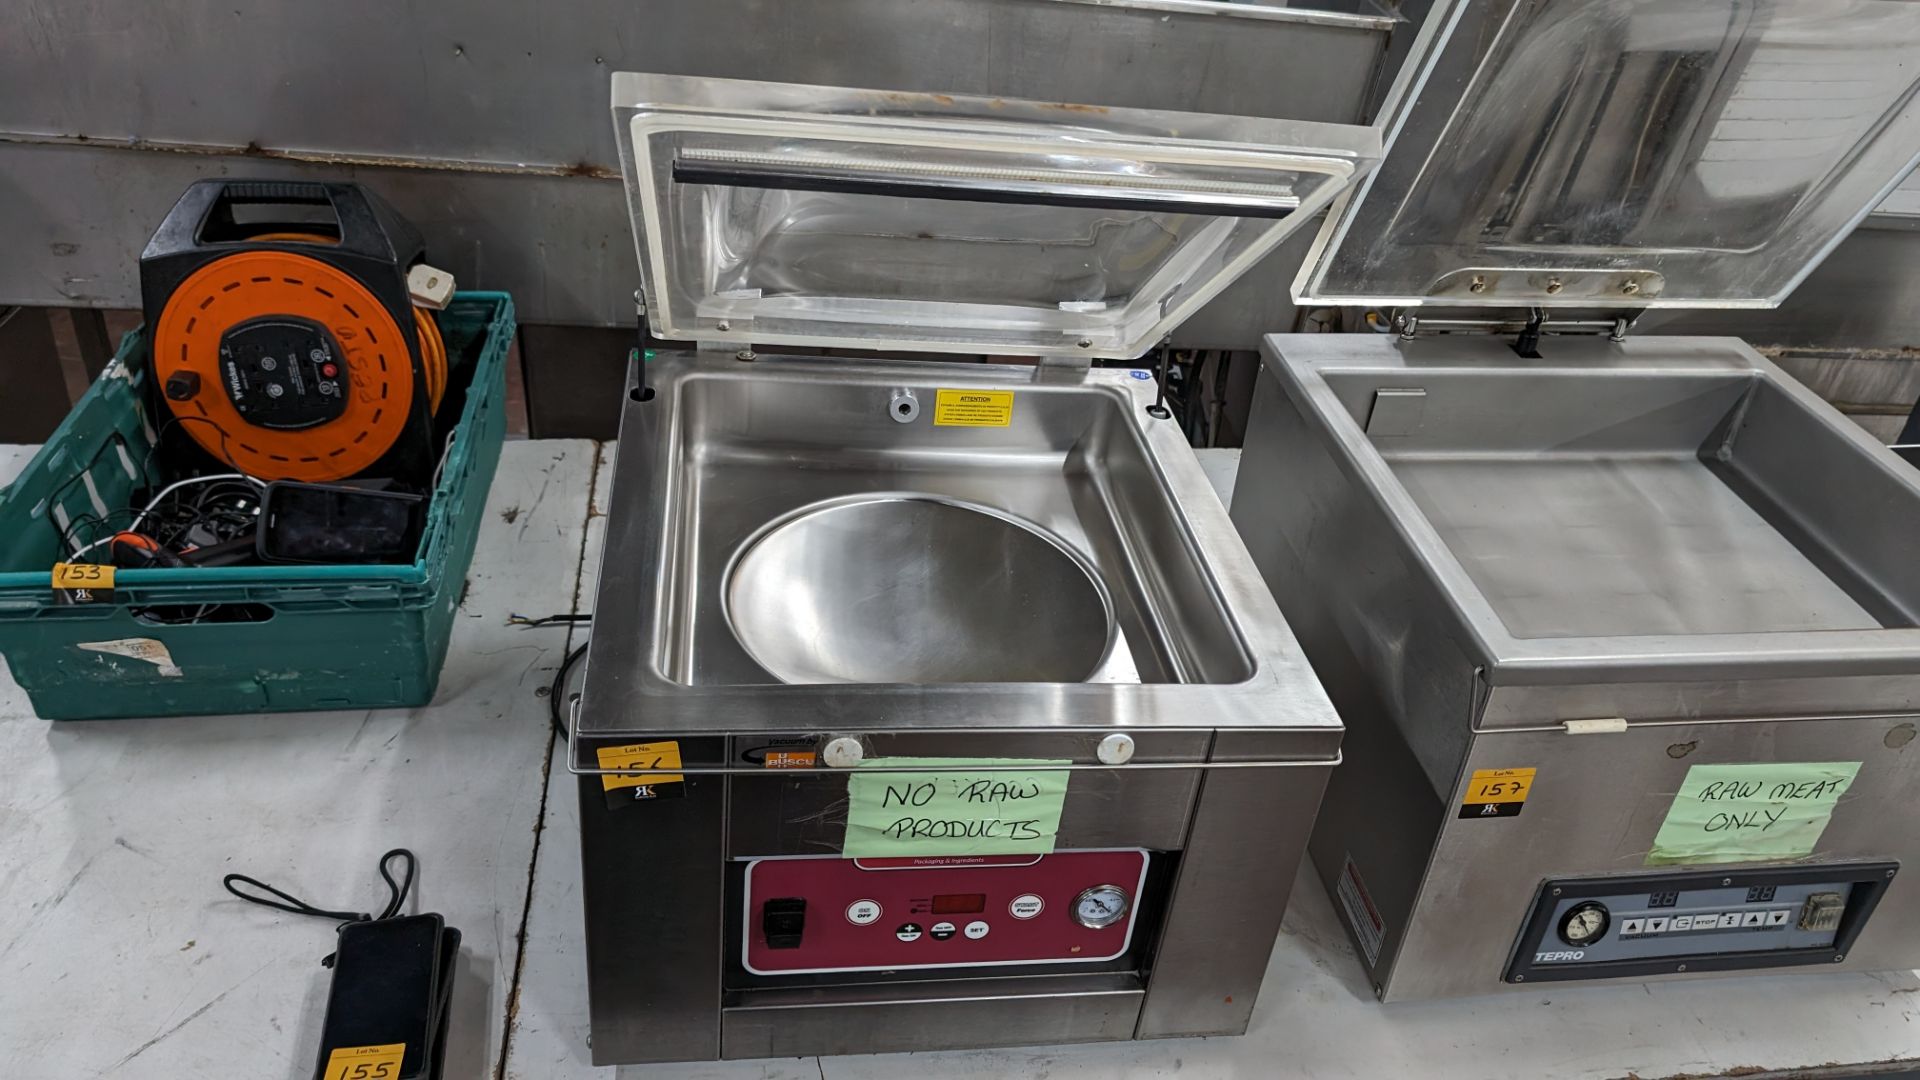 Parkers Food Machinery Plus benchtop stainless steel vacuum chamber machine, model Square 400 - Image 8 of 9